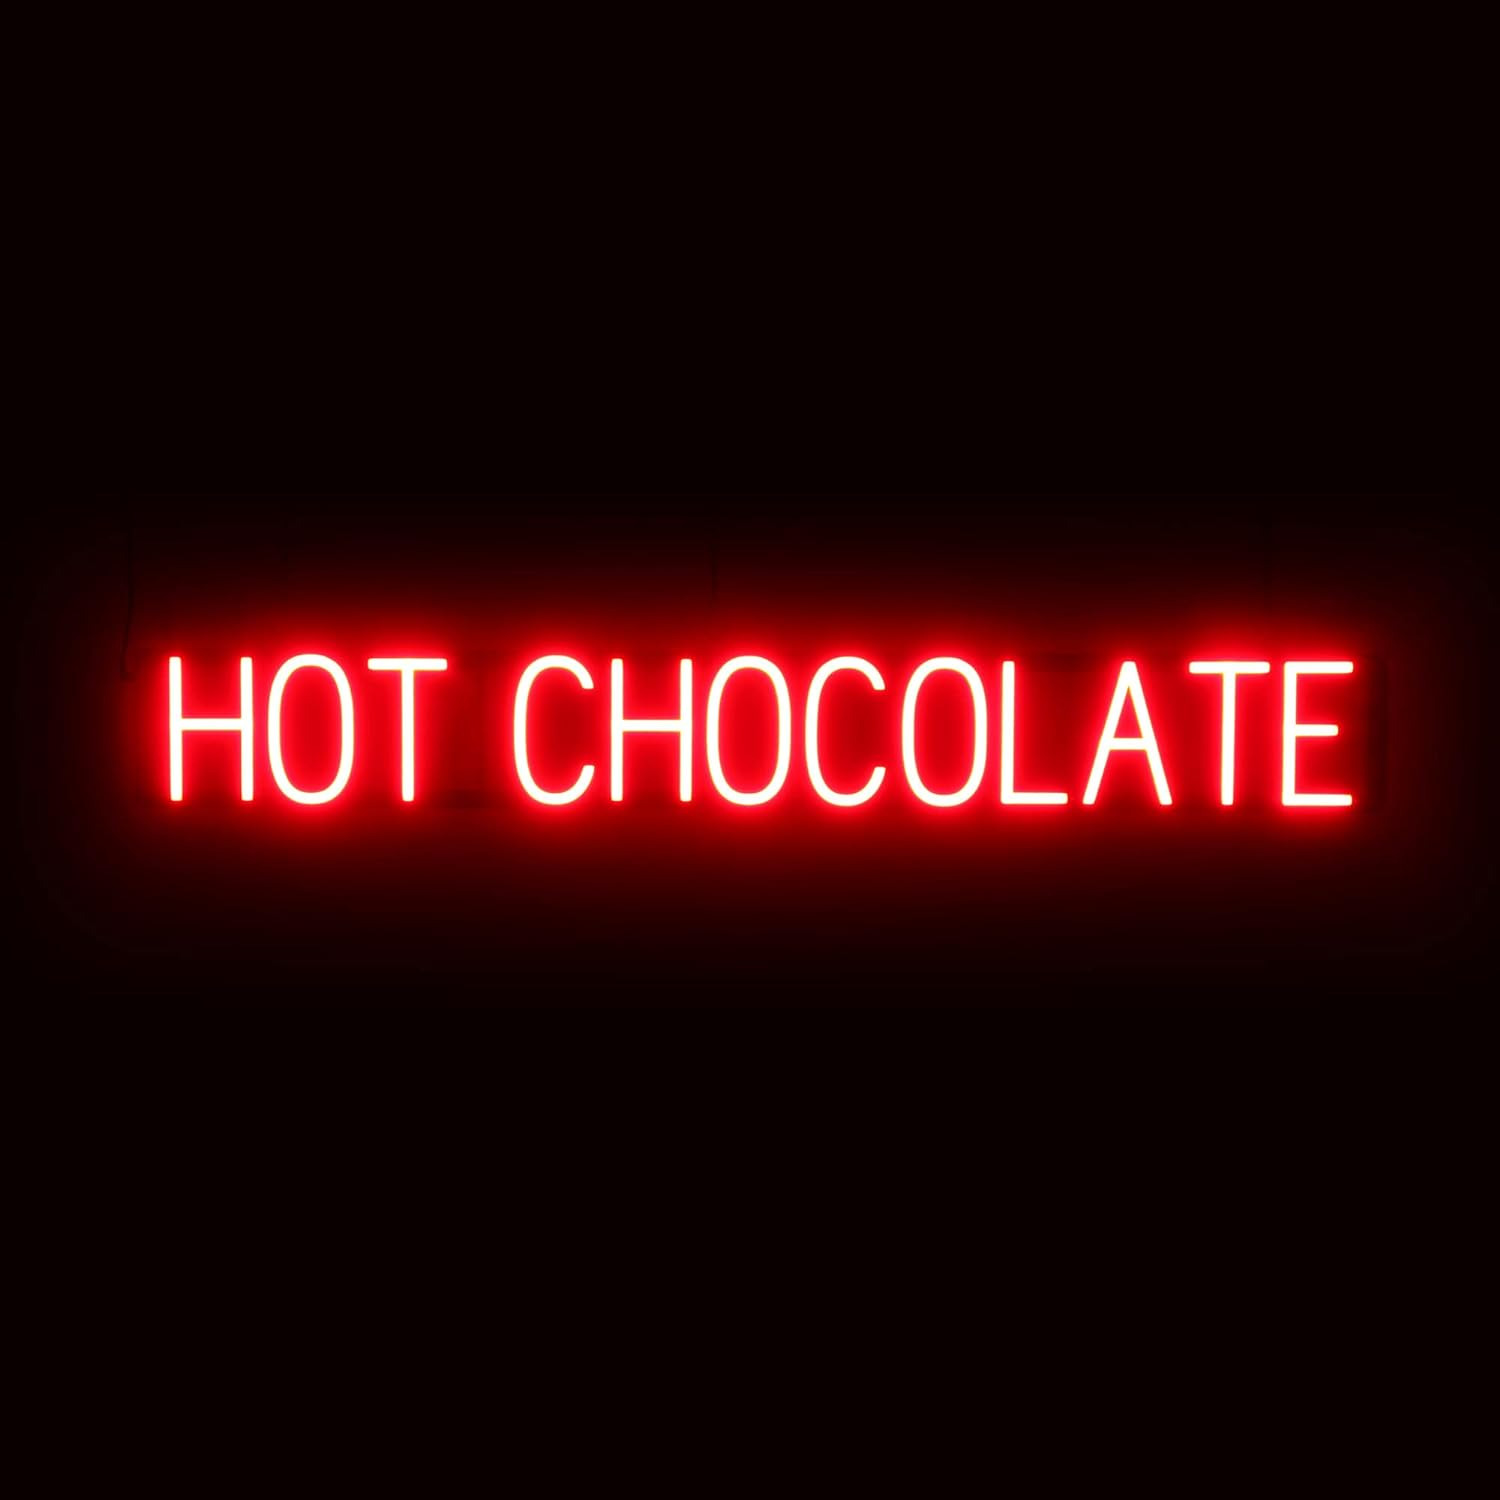 HOT CHOCOLATE Neon-Led Sign for Cafes. 48.8\